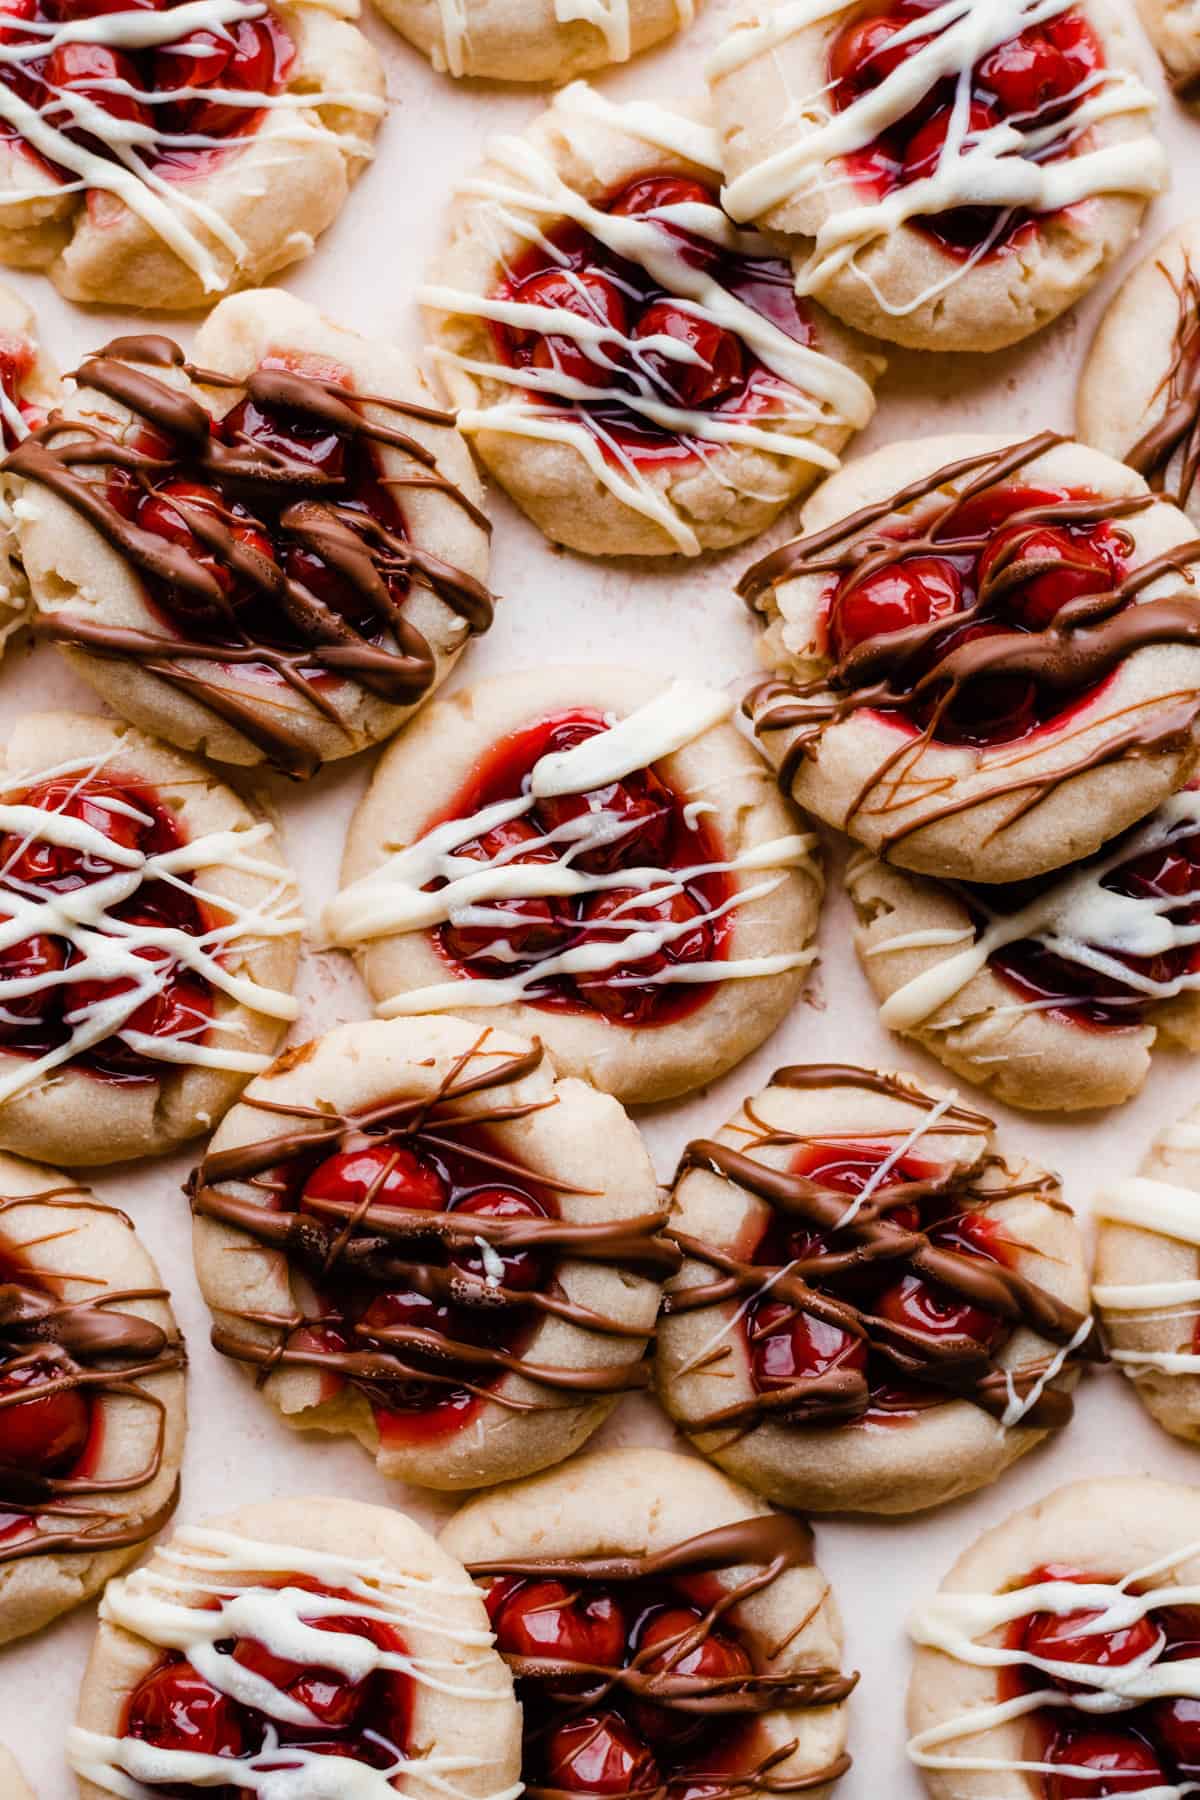 Cherry filled cookies drizzled with chocolate.